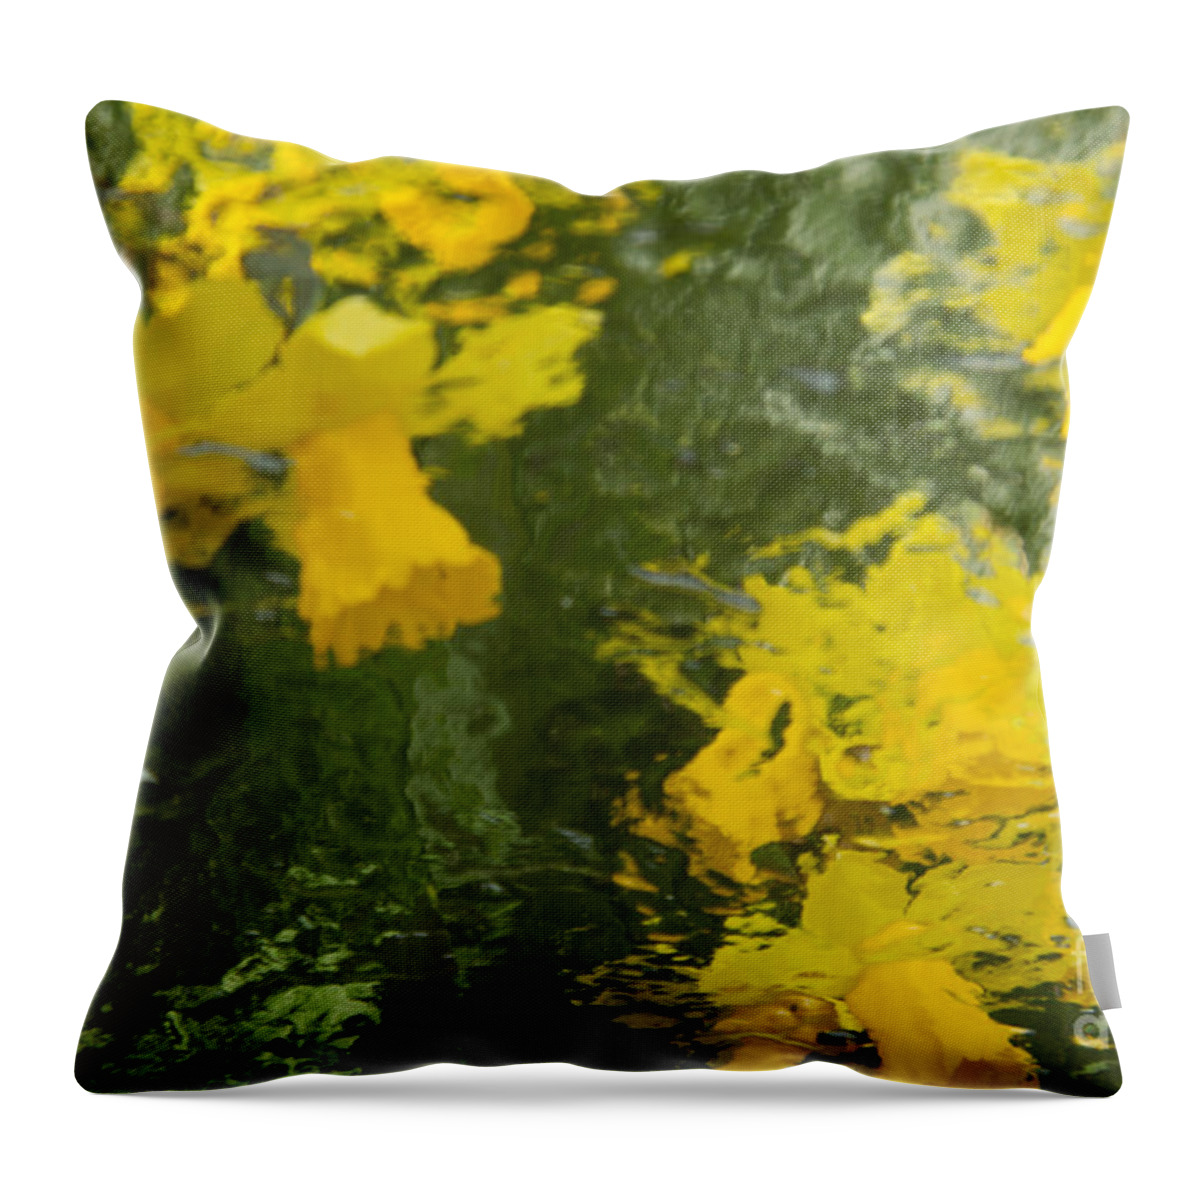 Daffodil Throw Pillow featuring the photograph Daffodil Impressions by Jeanette French